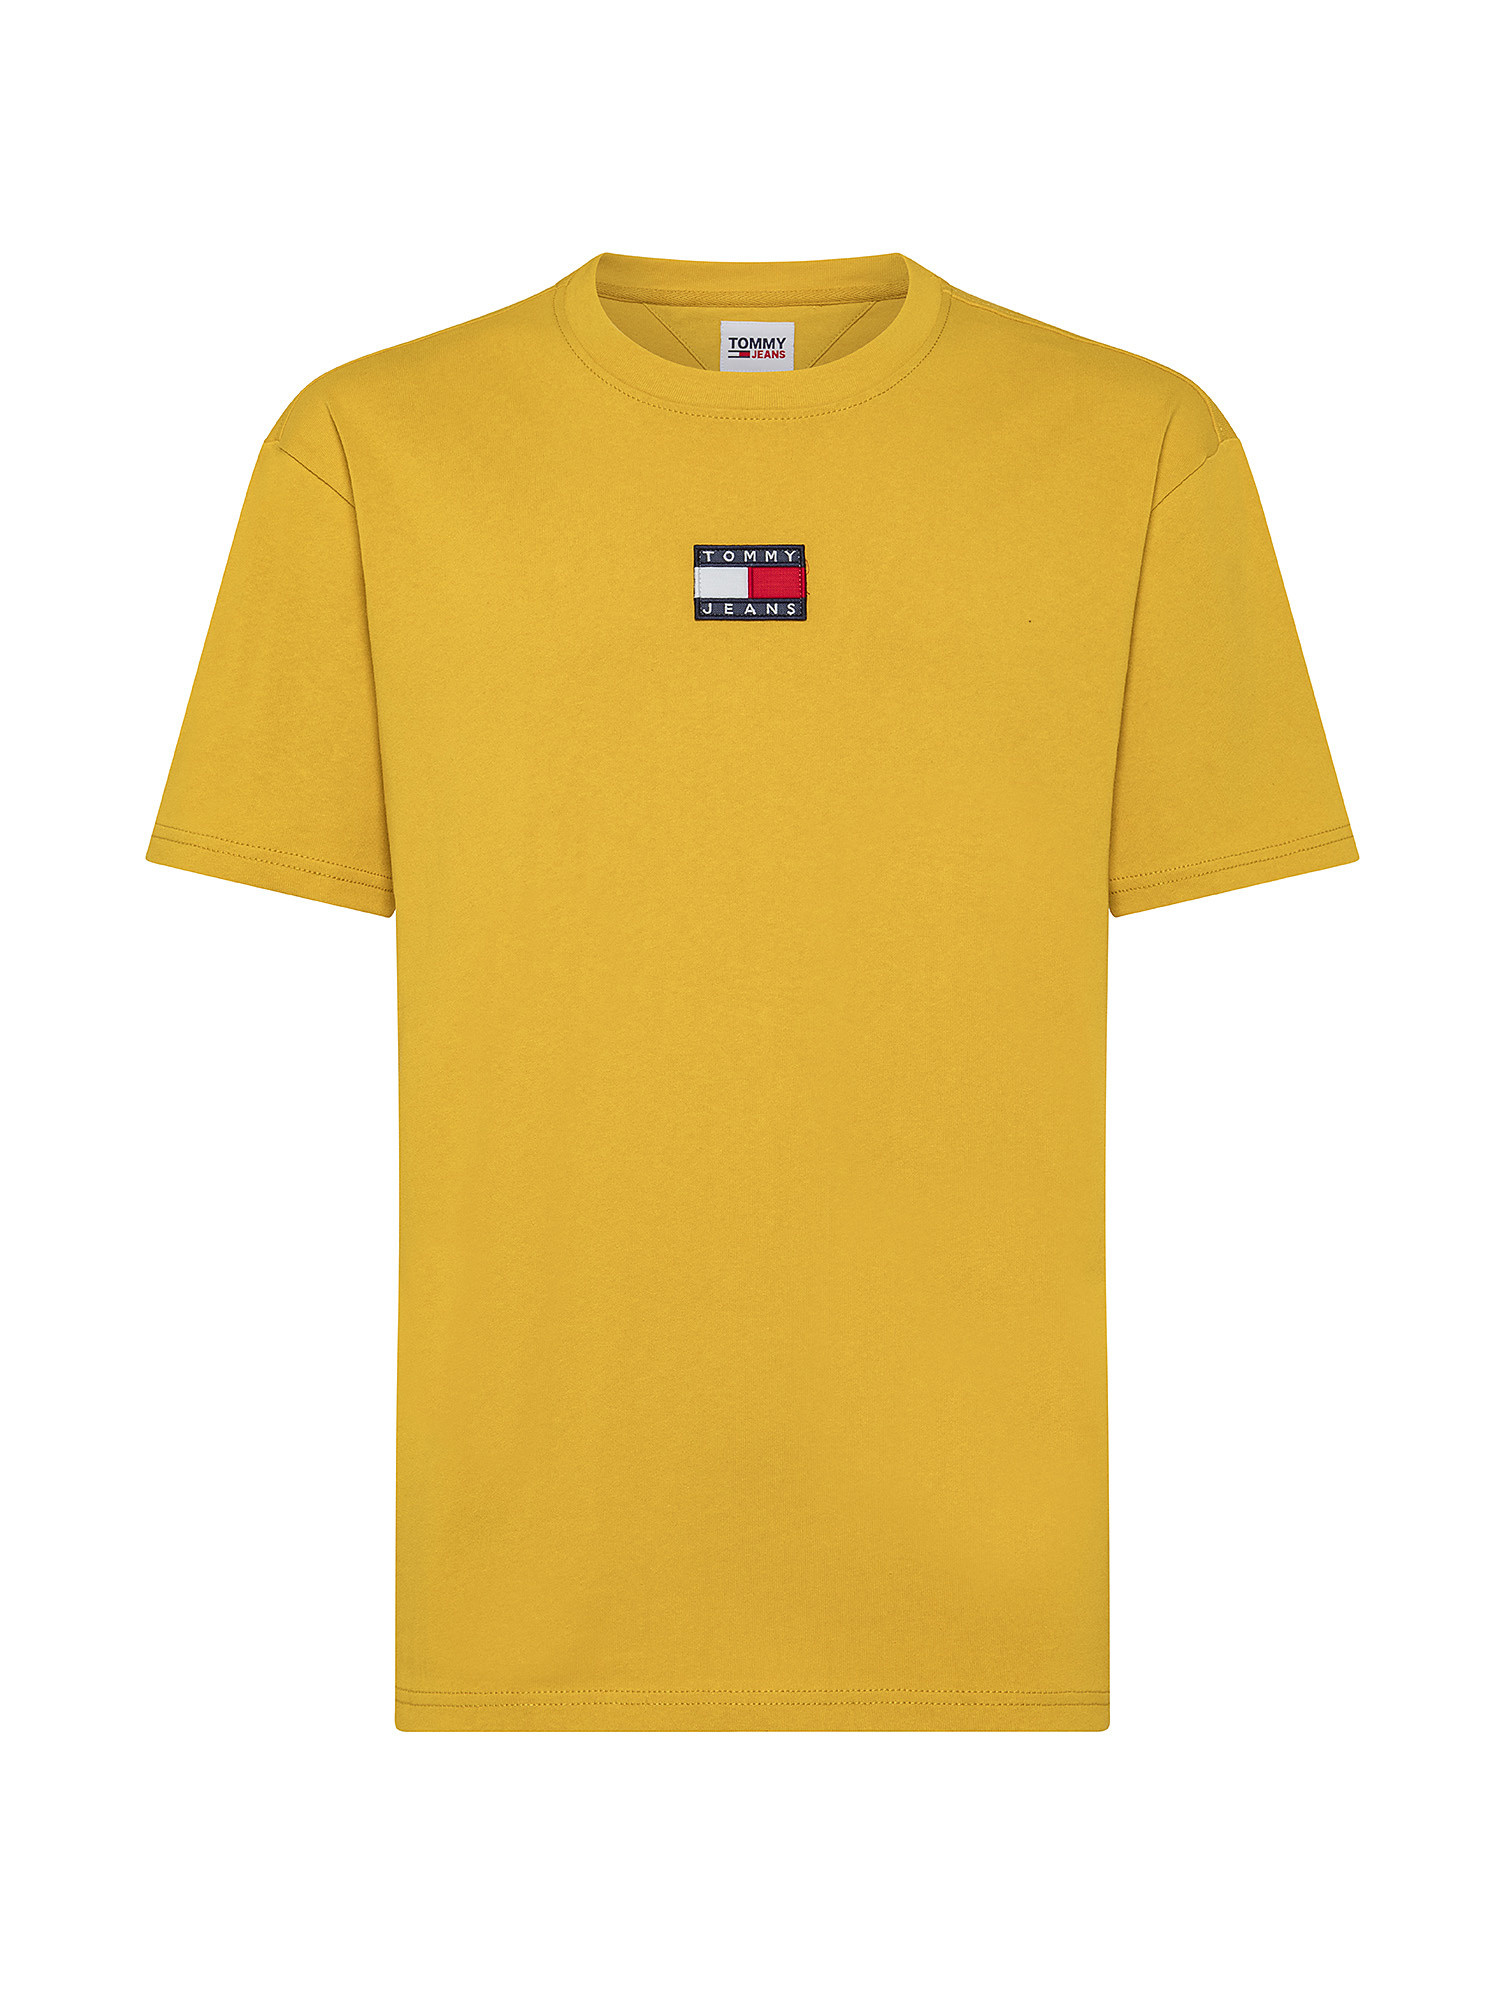 Tommy Jeans - T-shirt girocollo con logo, Giallo, large image number 0